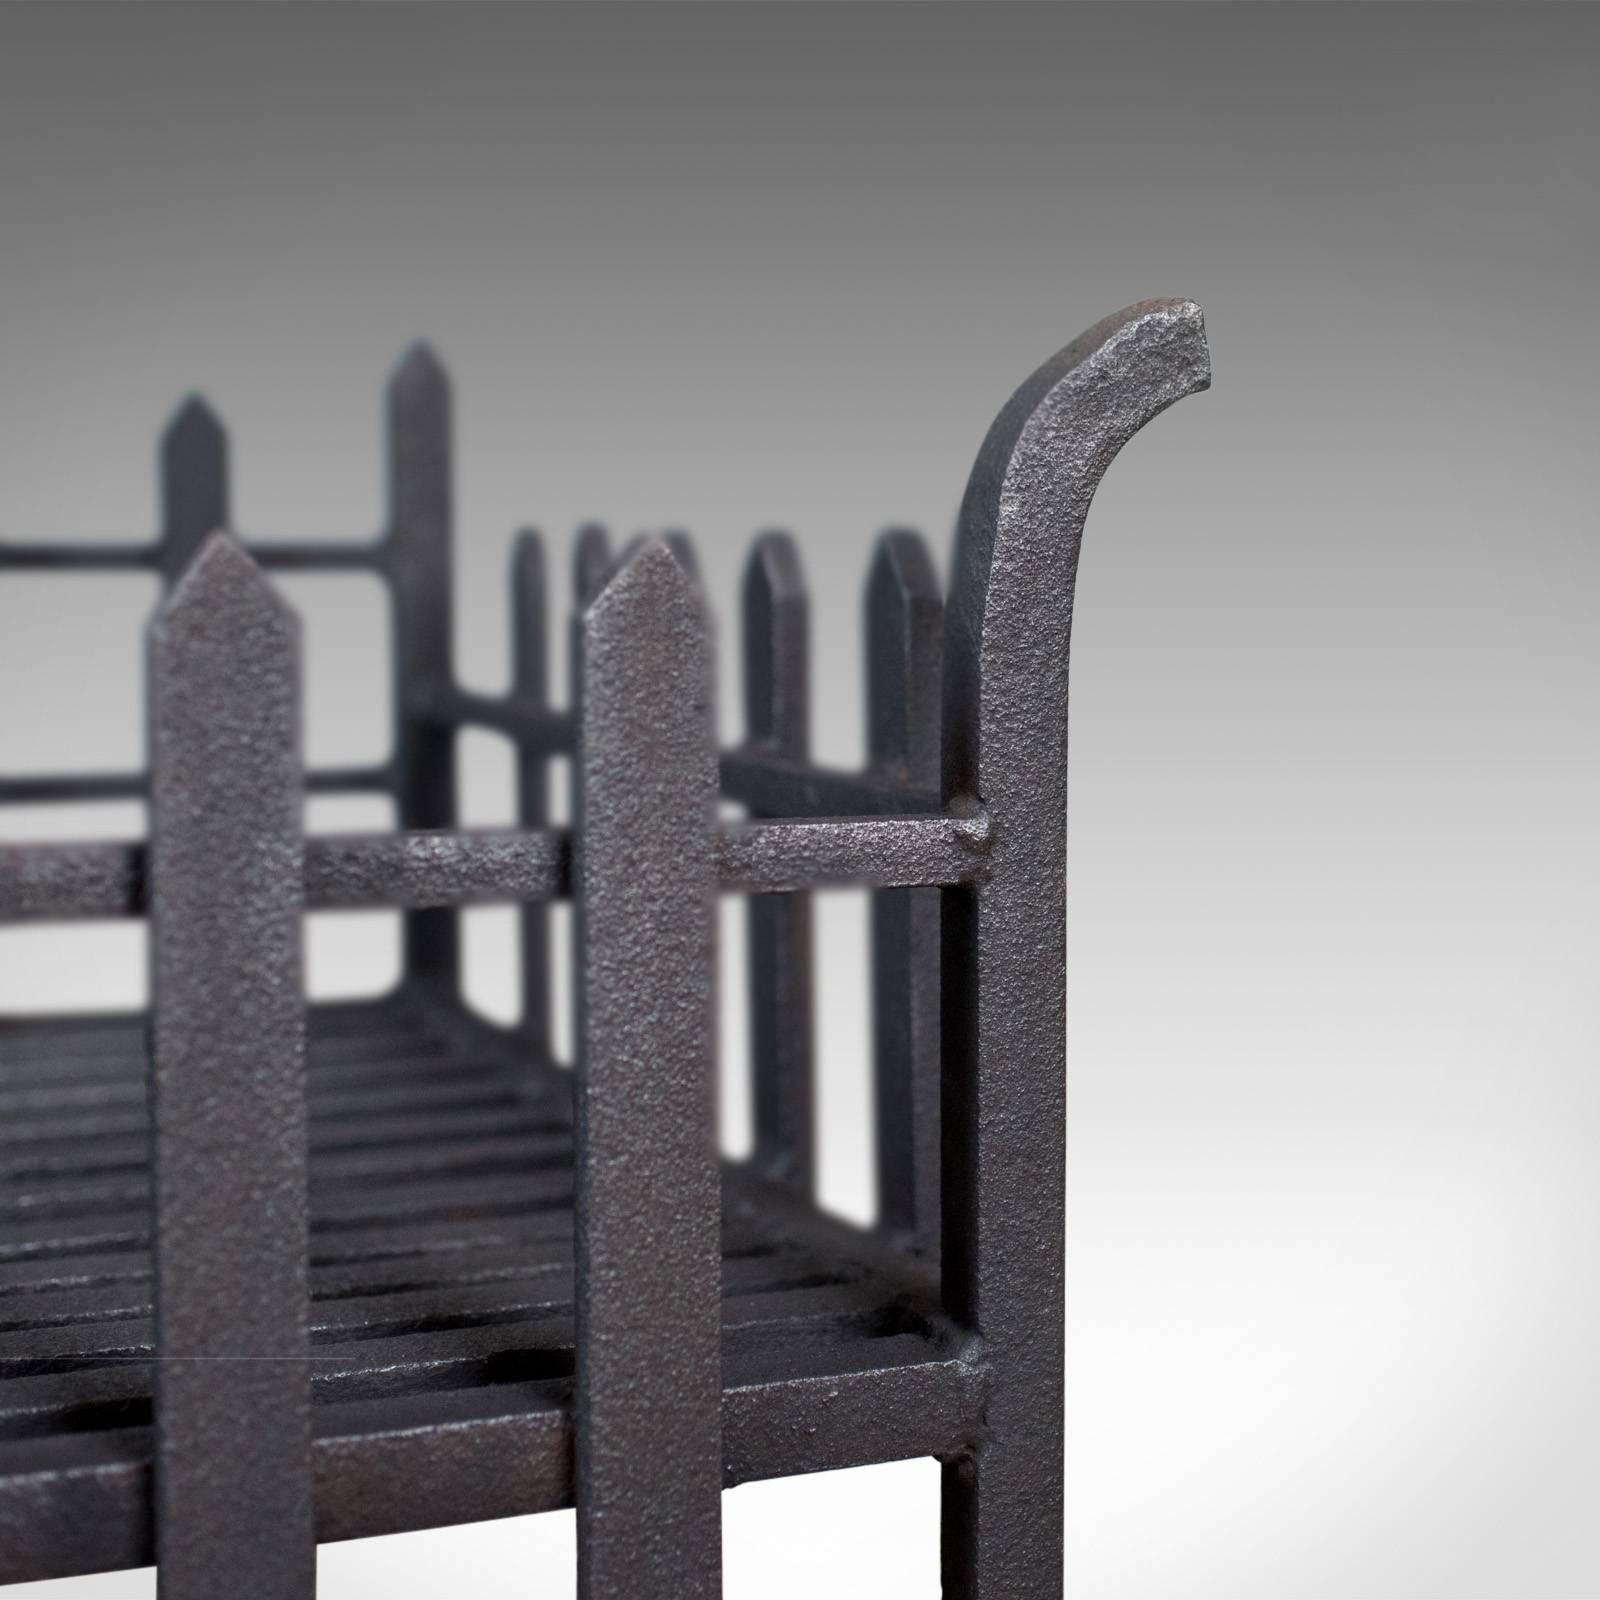 20th Century Large Antique Fire Basket, English, Victorian Fireplace Iron Grate, circa 1900